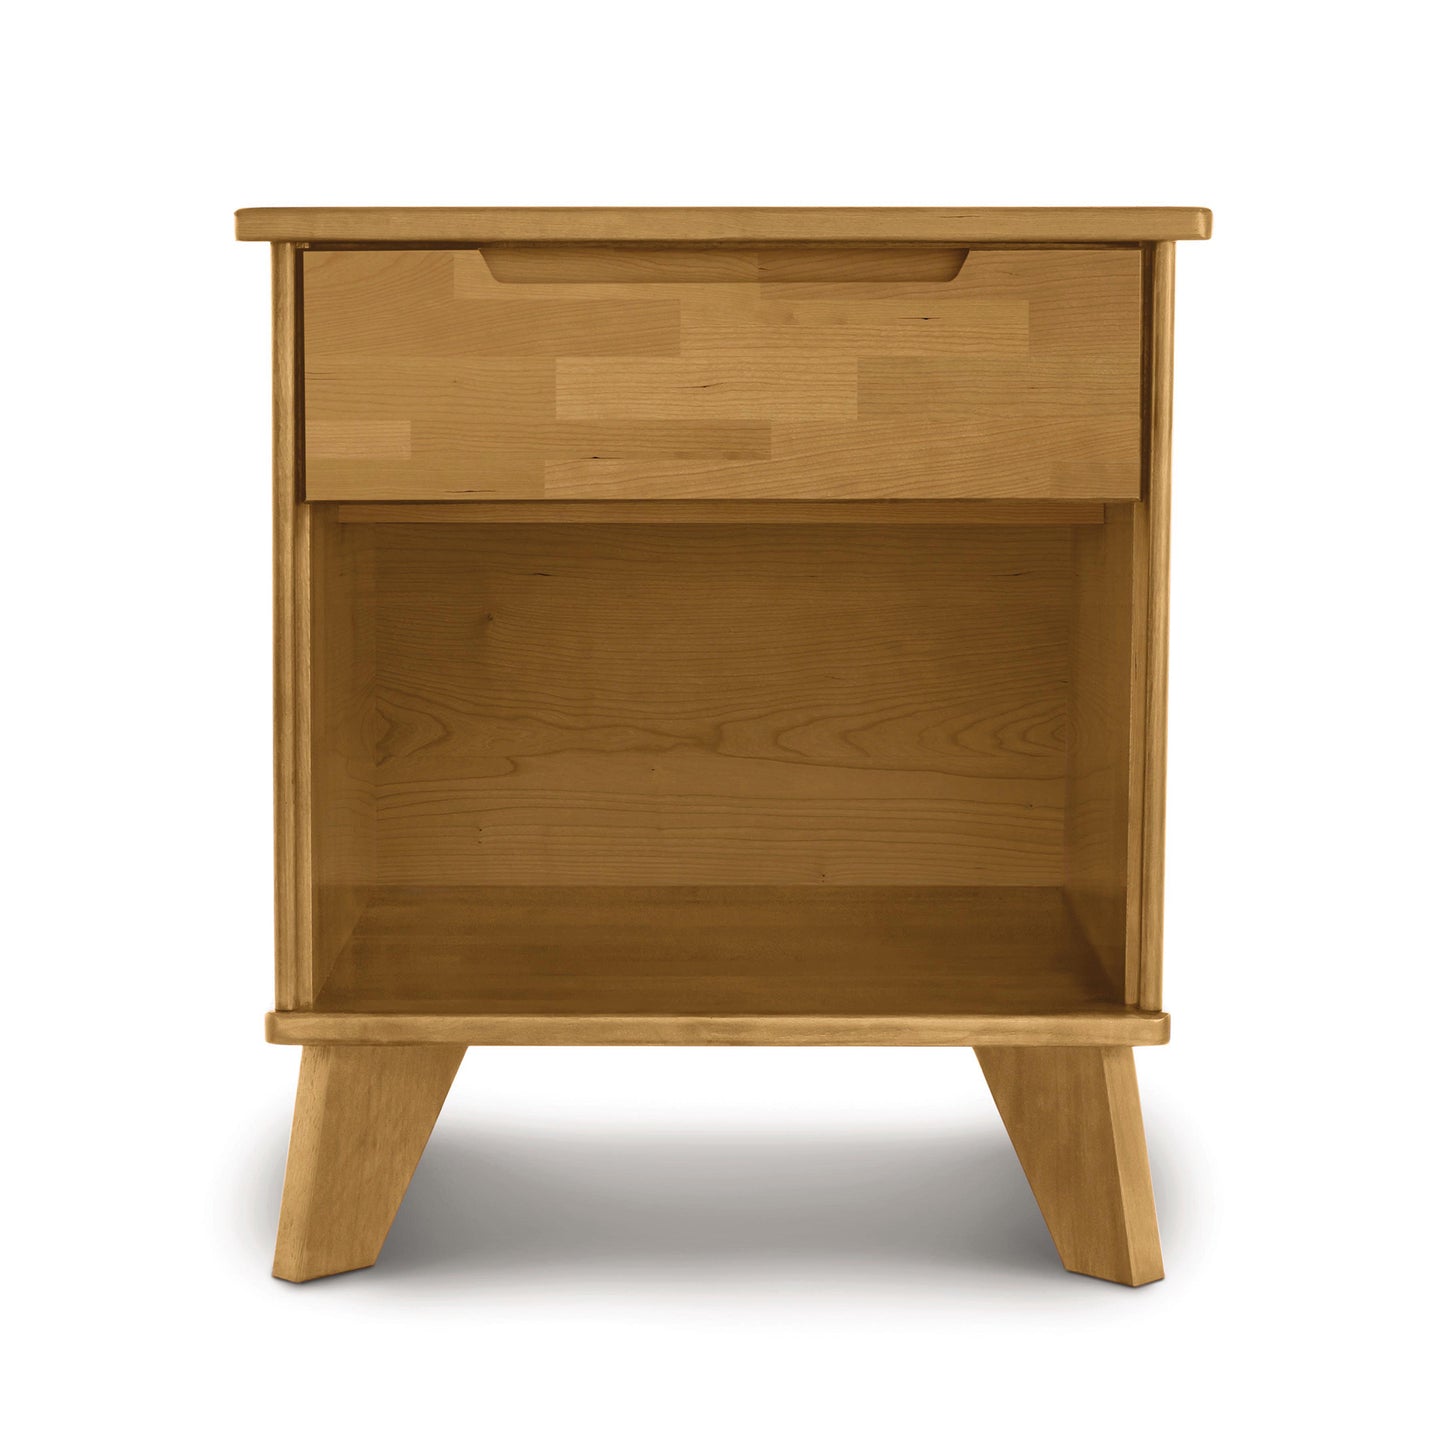 A sustainable Linn 1-Drawer Enclosed Shelf Nightstand from Copeland Furniture standing against a white background.